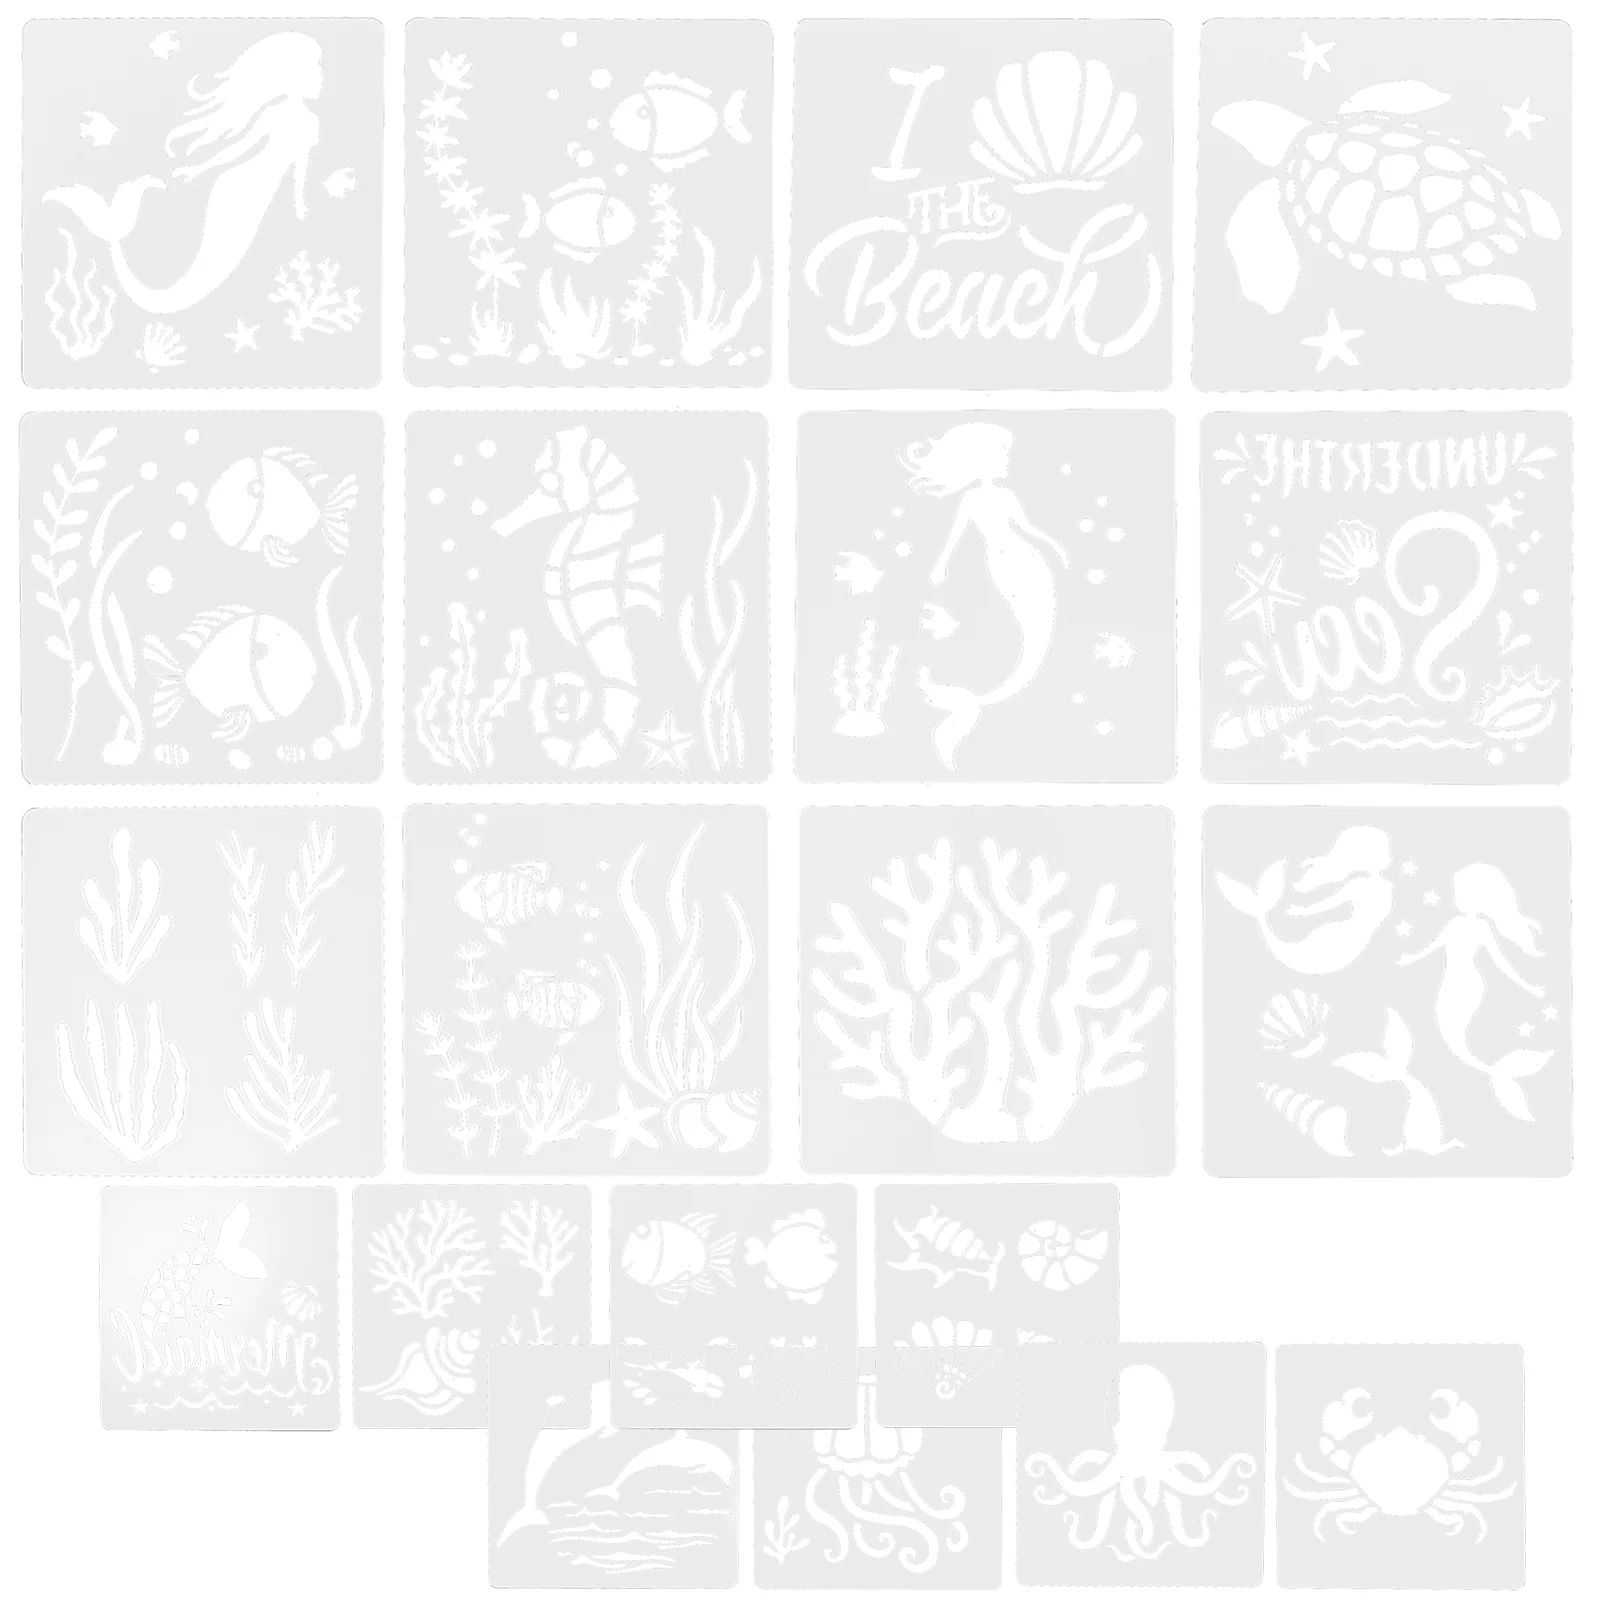 

20 Sheets Ocean Painting Template Stencils for Yesweety Plastic Wall Decorative Mold Acyrlic Sea Creatures The Pet on Wood